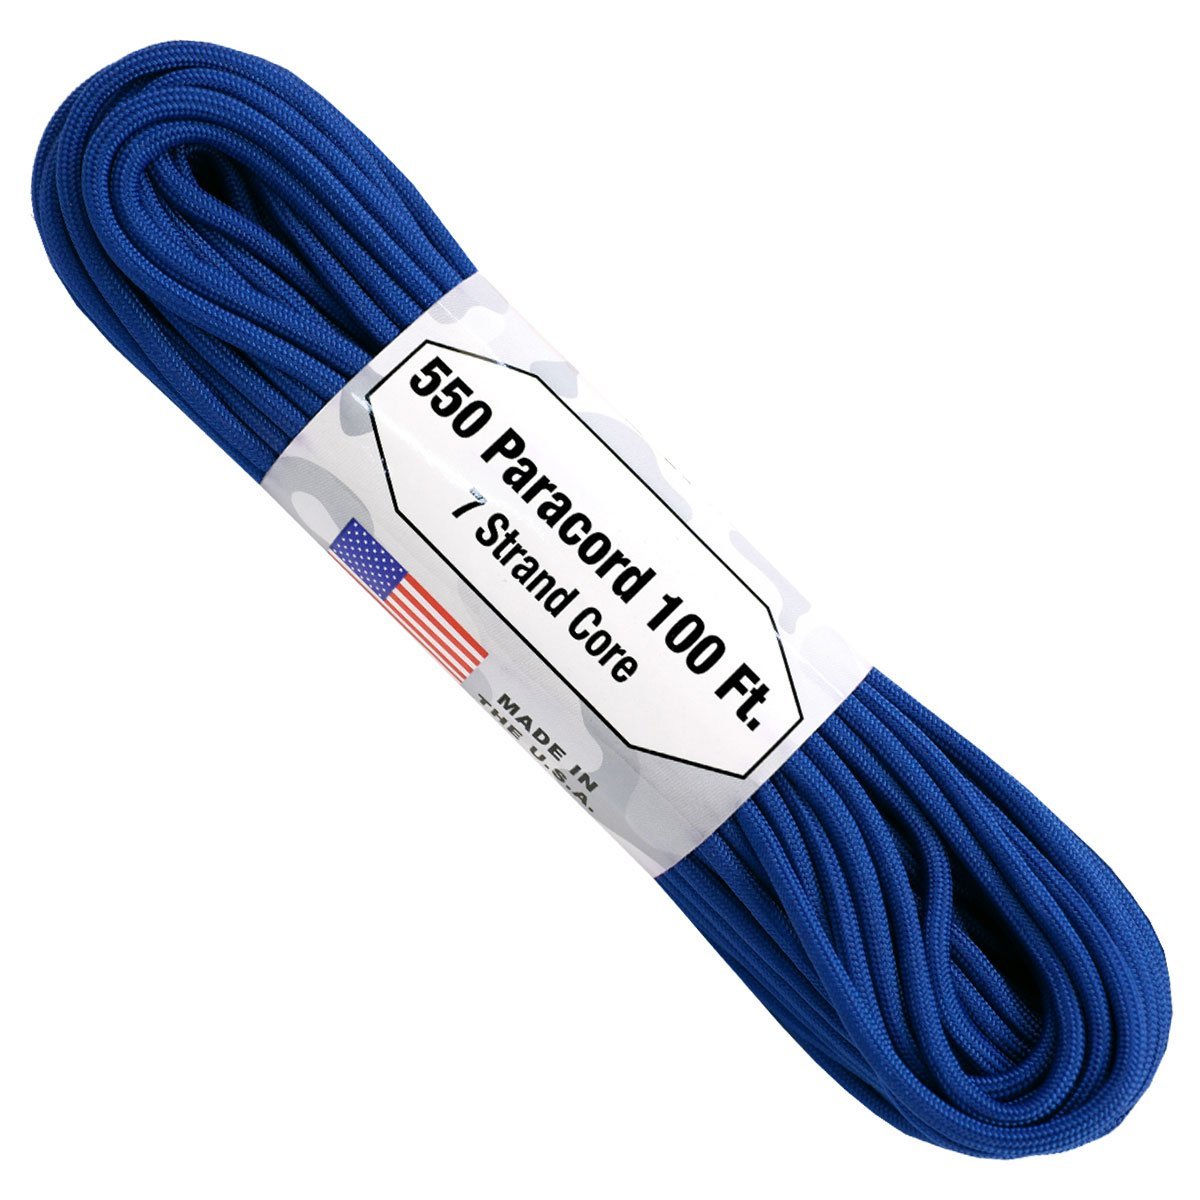 【 1m カット売り 】 550lb Paracord ATWOOD ROPE MFG社製 / アメリカ製 ナイロン製 パラコード , 太さ：約4mm